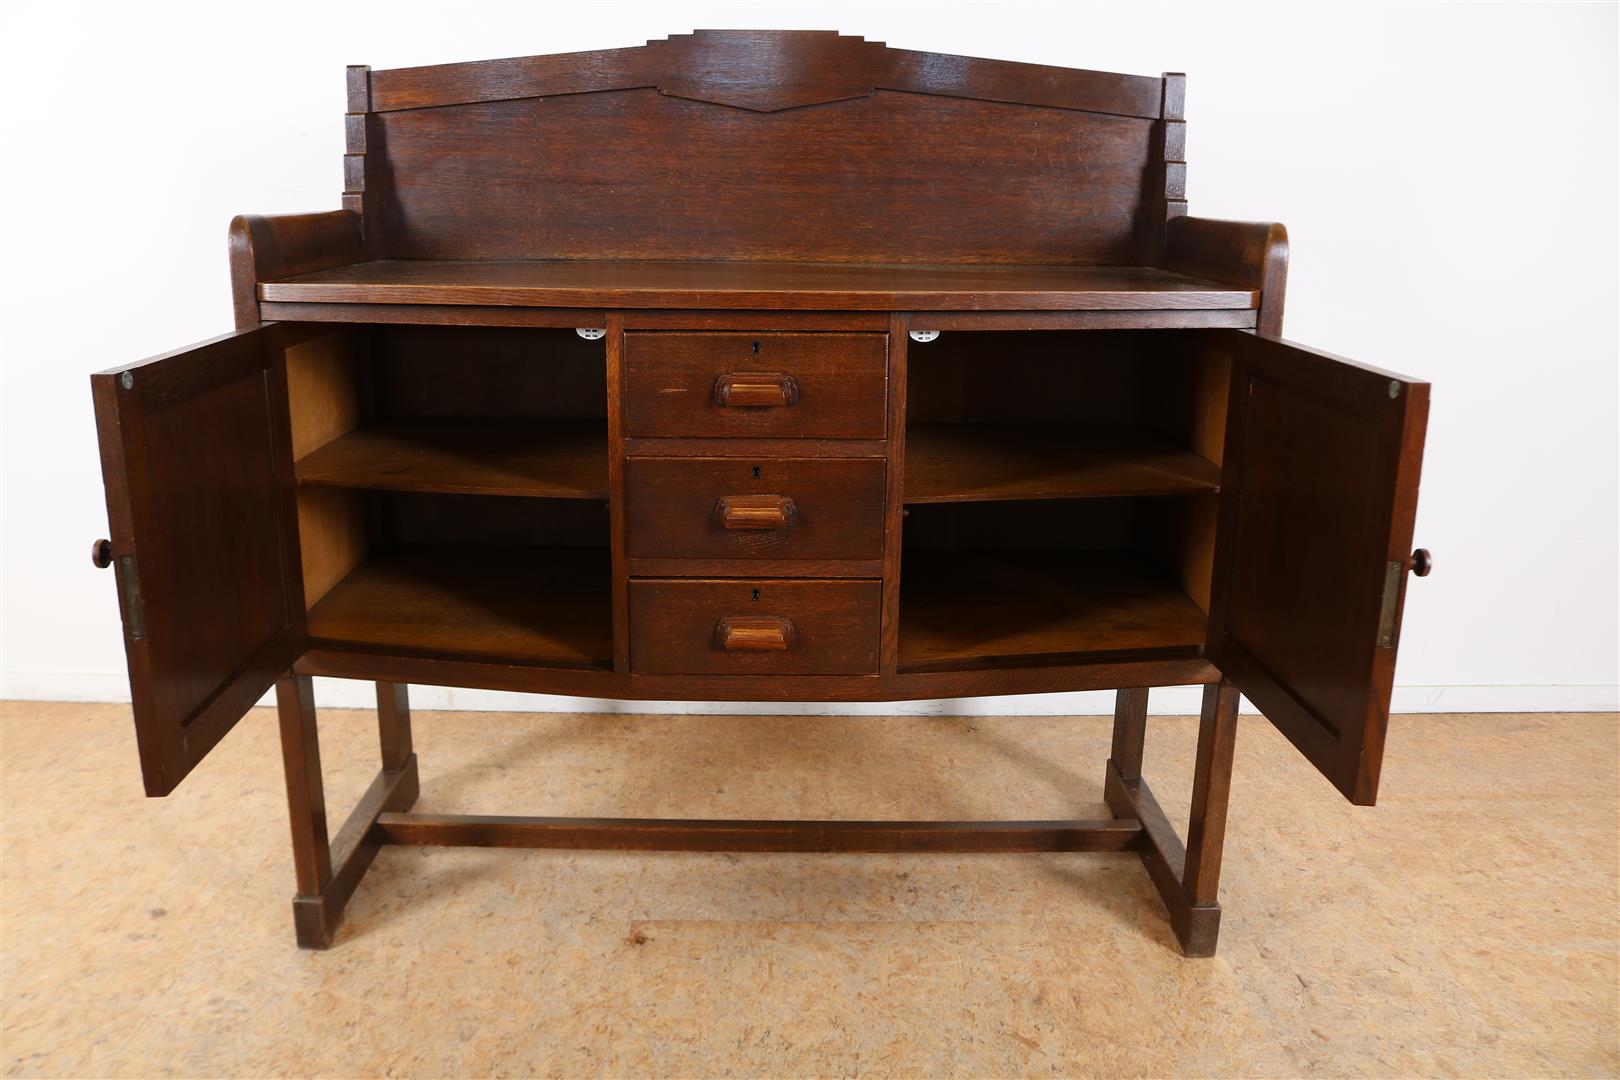 Oak Amsterdam school buffet with upstand, 3 drawers flanked by 2 doors, ca. 1920, 124 x 125 x 58 - Image 3 of 5